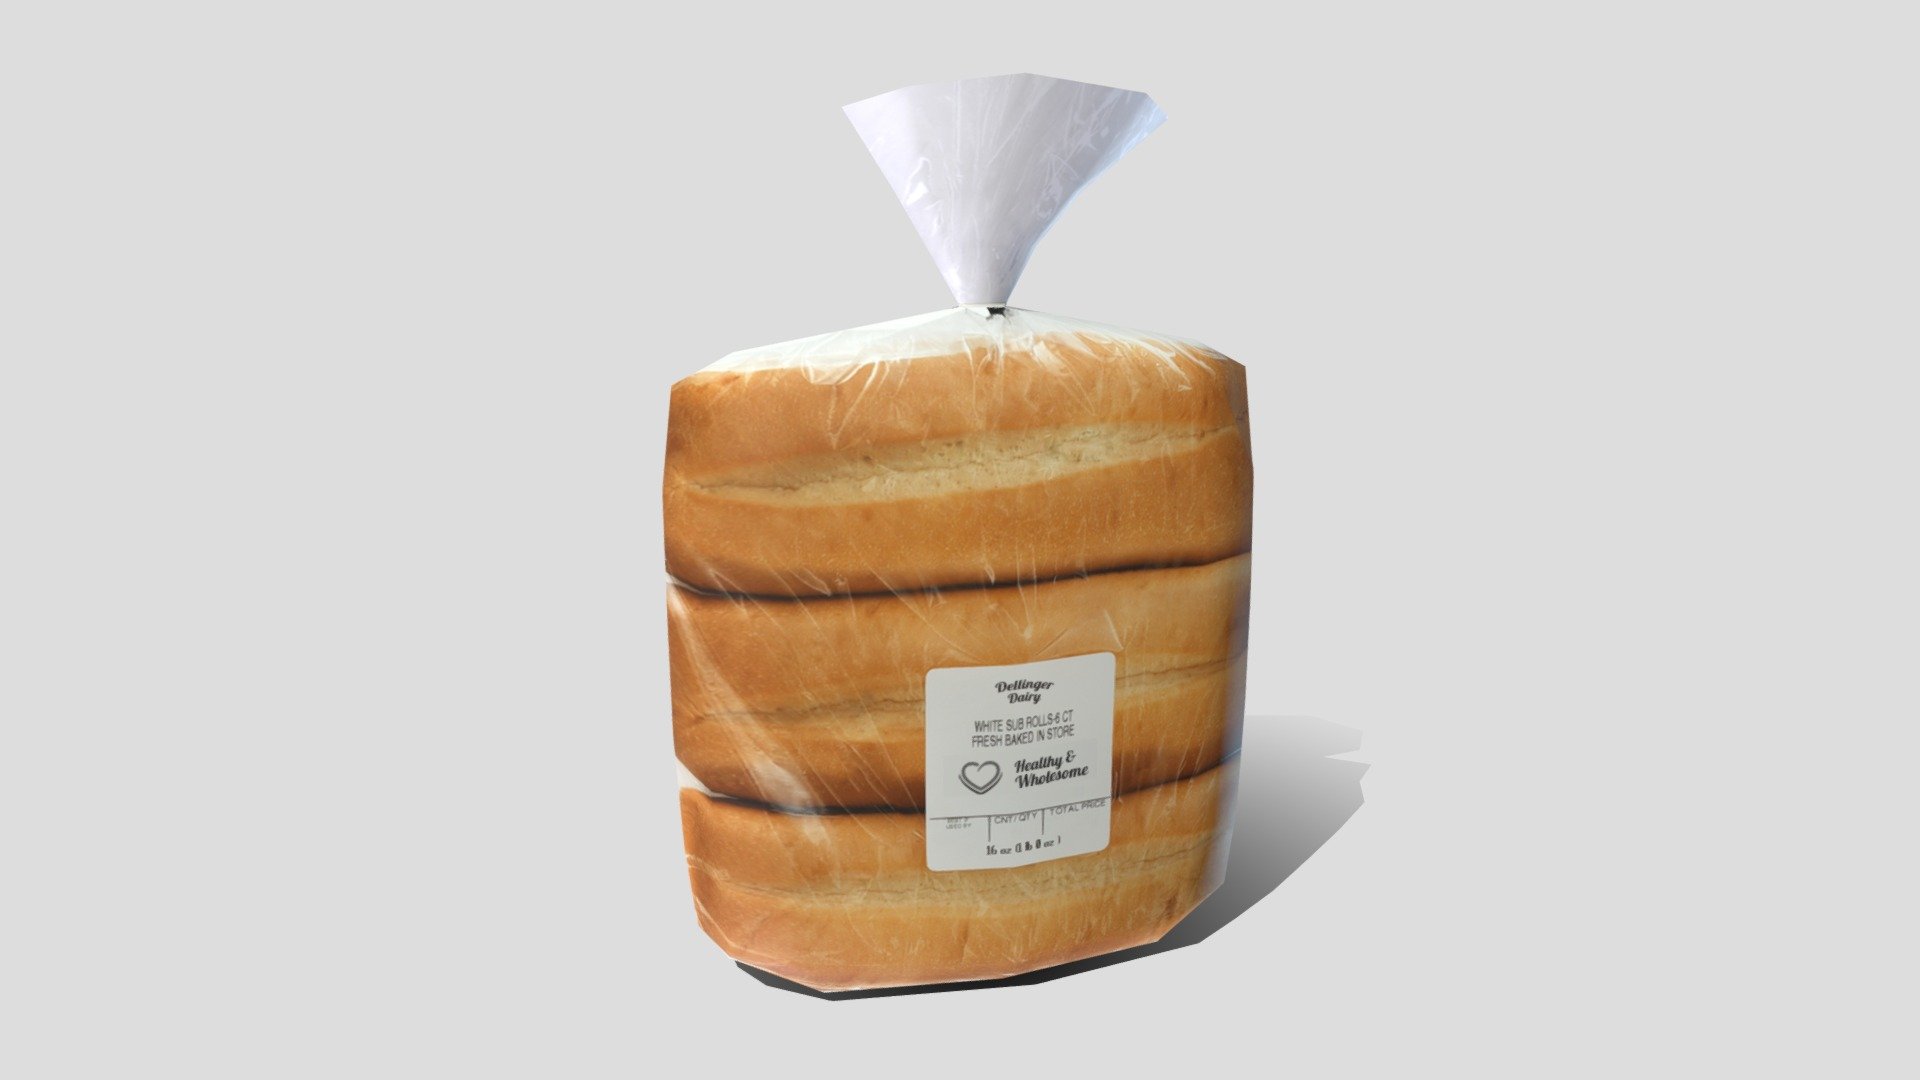 Low-poly VR / AR Models for Grocery Store

Bakery Section

More Grocery Store Products: https://skfb.ly/6STLt - Packaged Sub Rolls - Buy Royalty Free 3D model by MW 3D (@mw3dart) 3d model